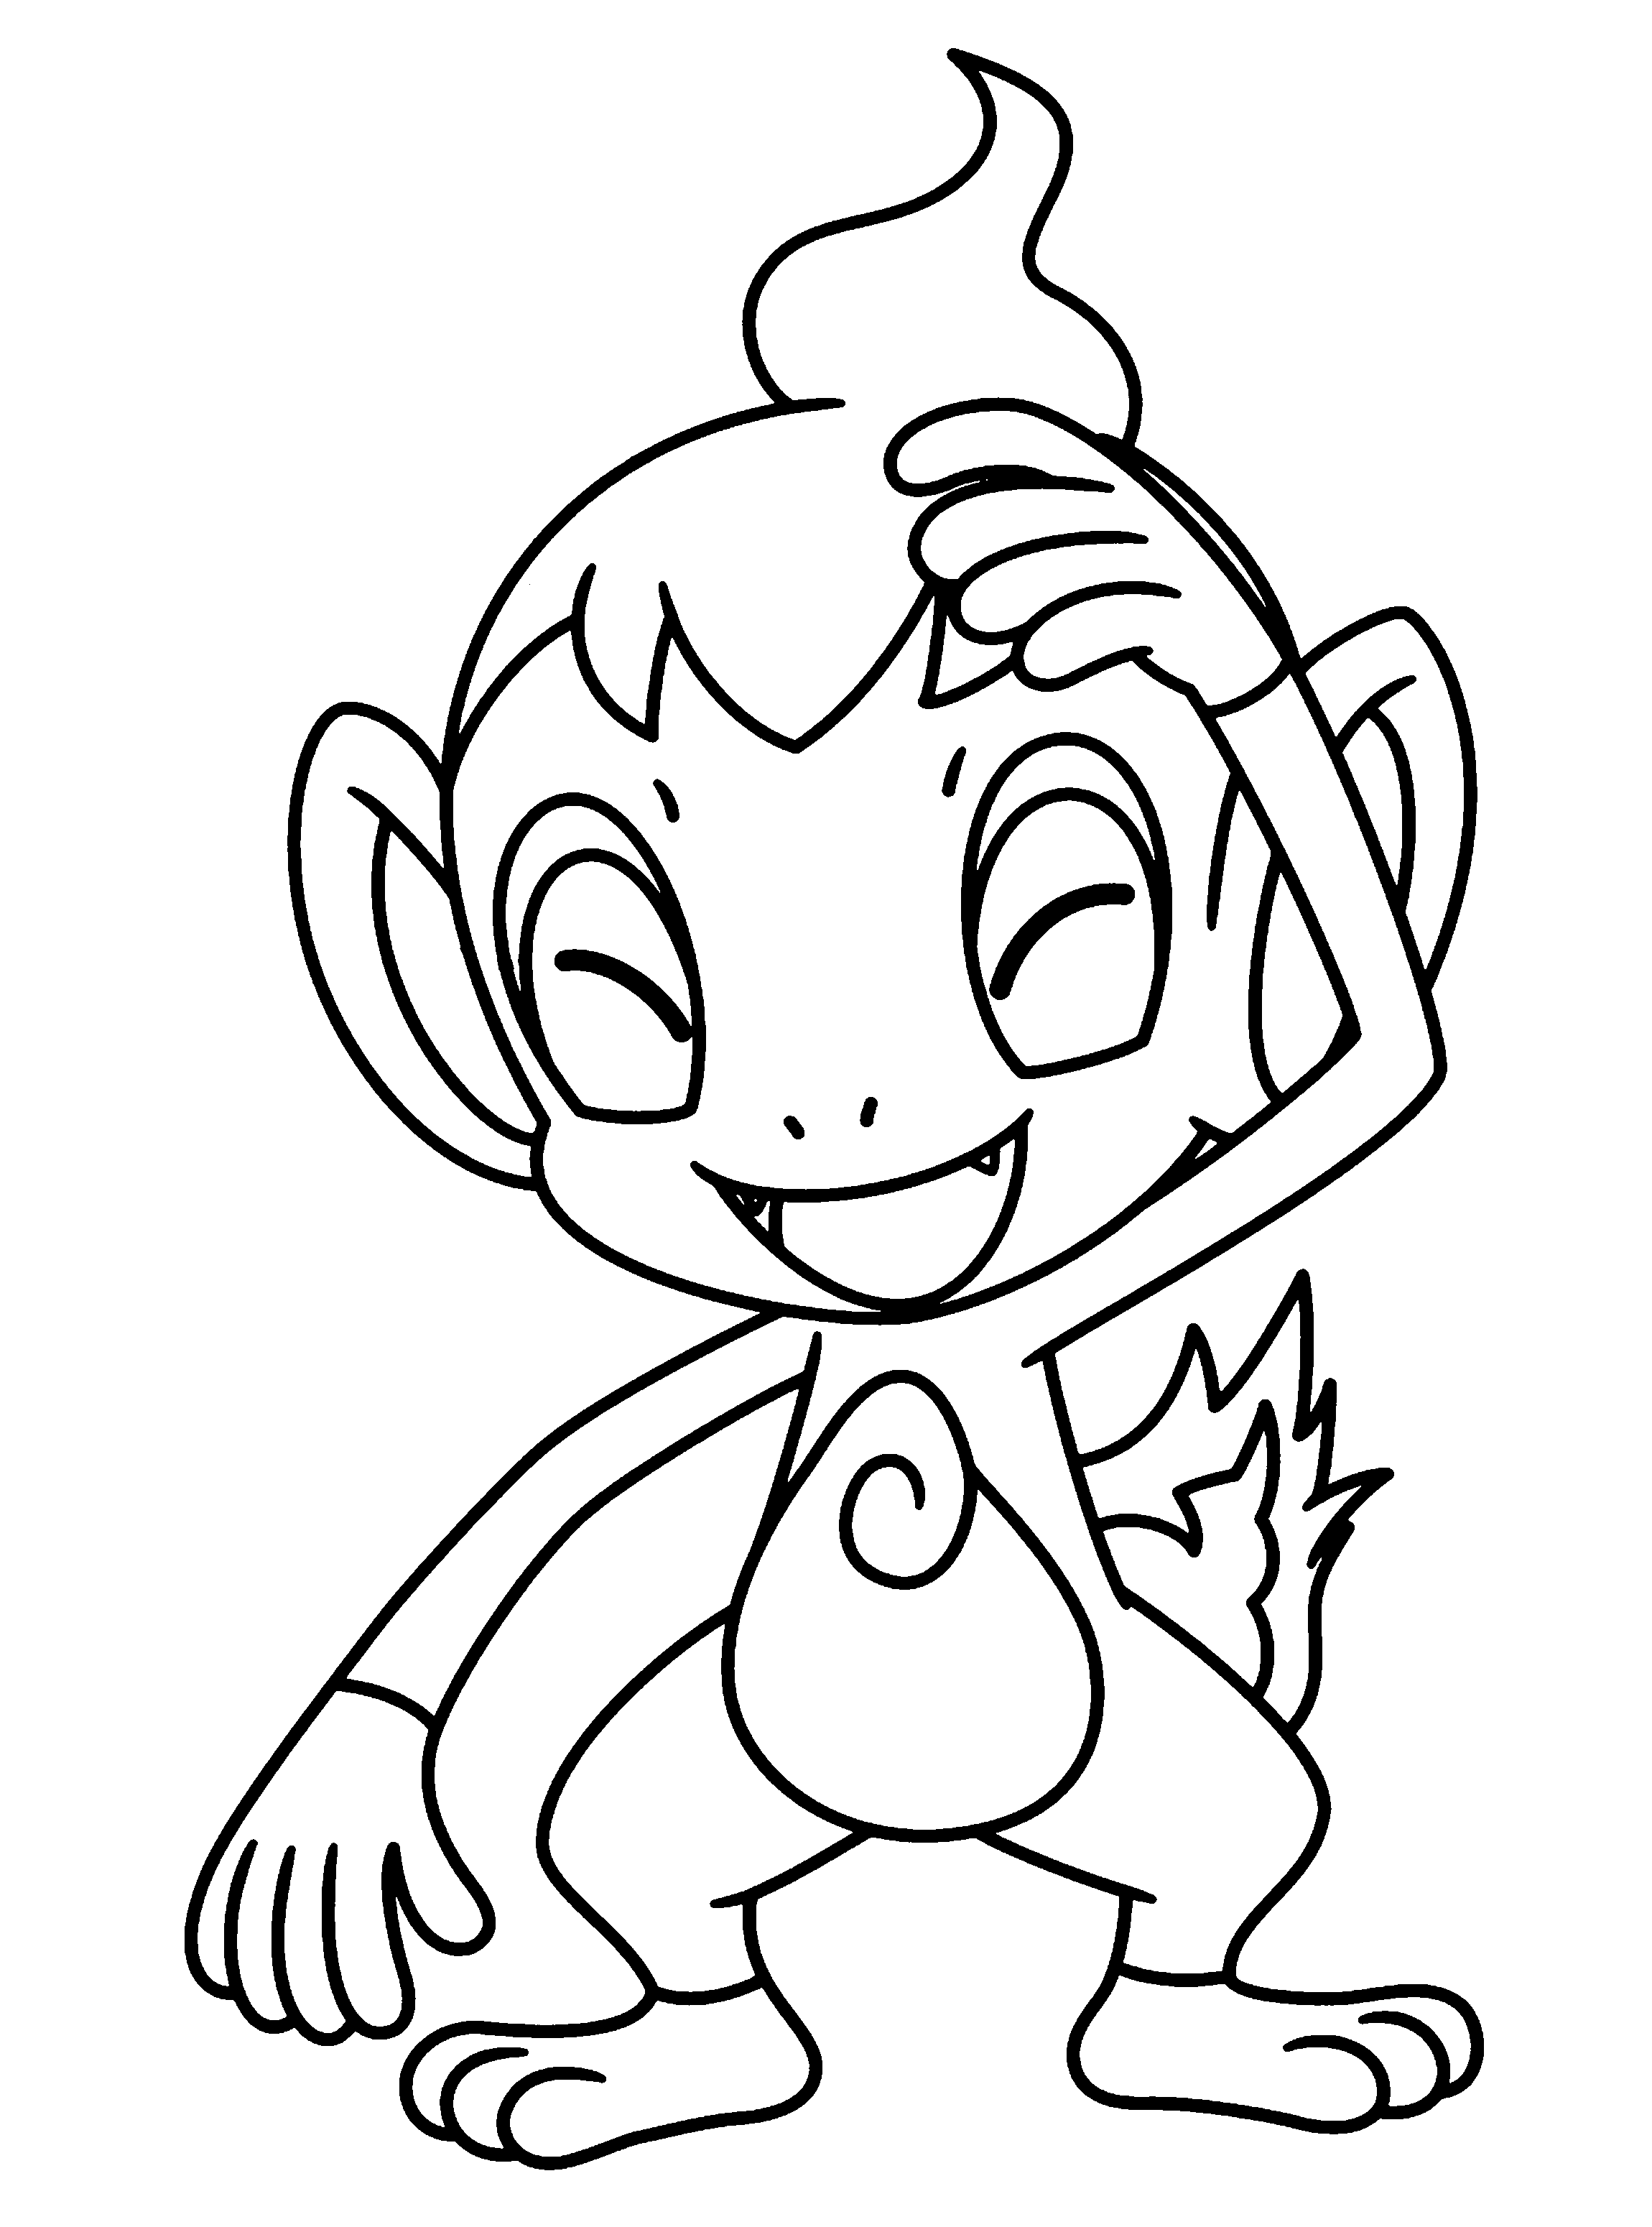 Coloring Page - Pokemon diamond pearl coloring Page